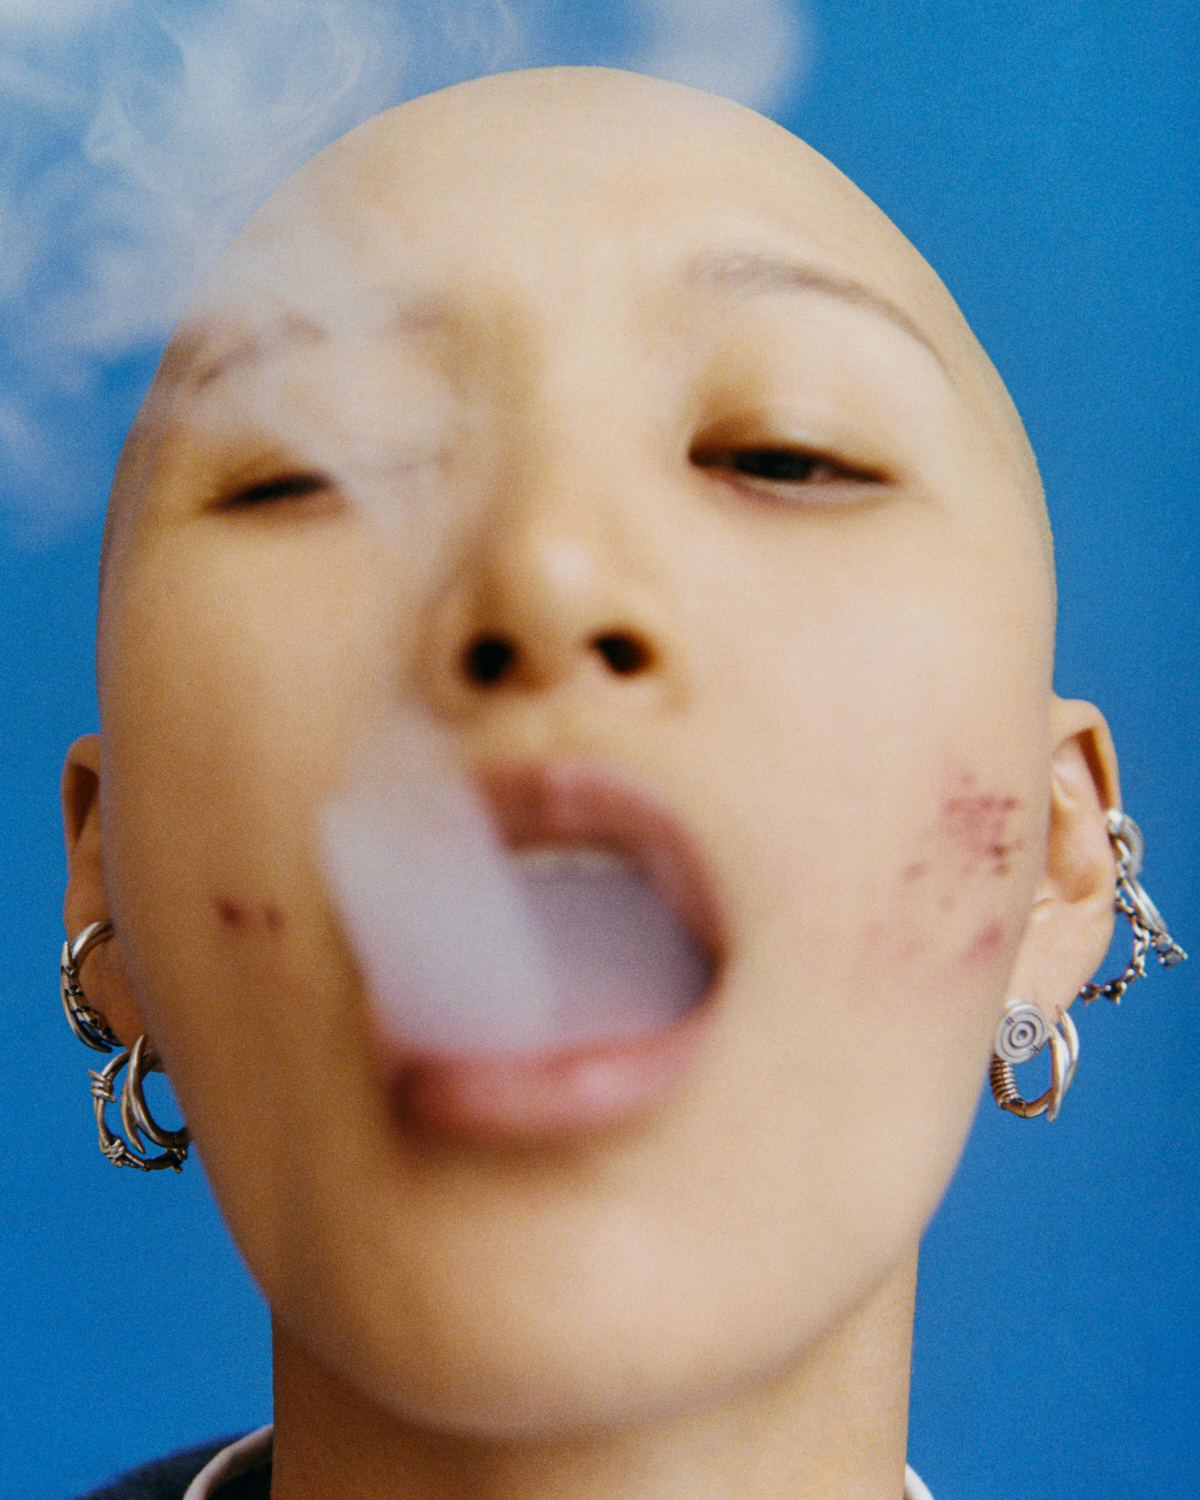 a model with lots of silver earrings and a shaved head blows smoke from her mouth, obscuring part of her face 